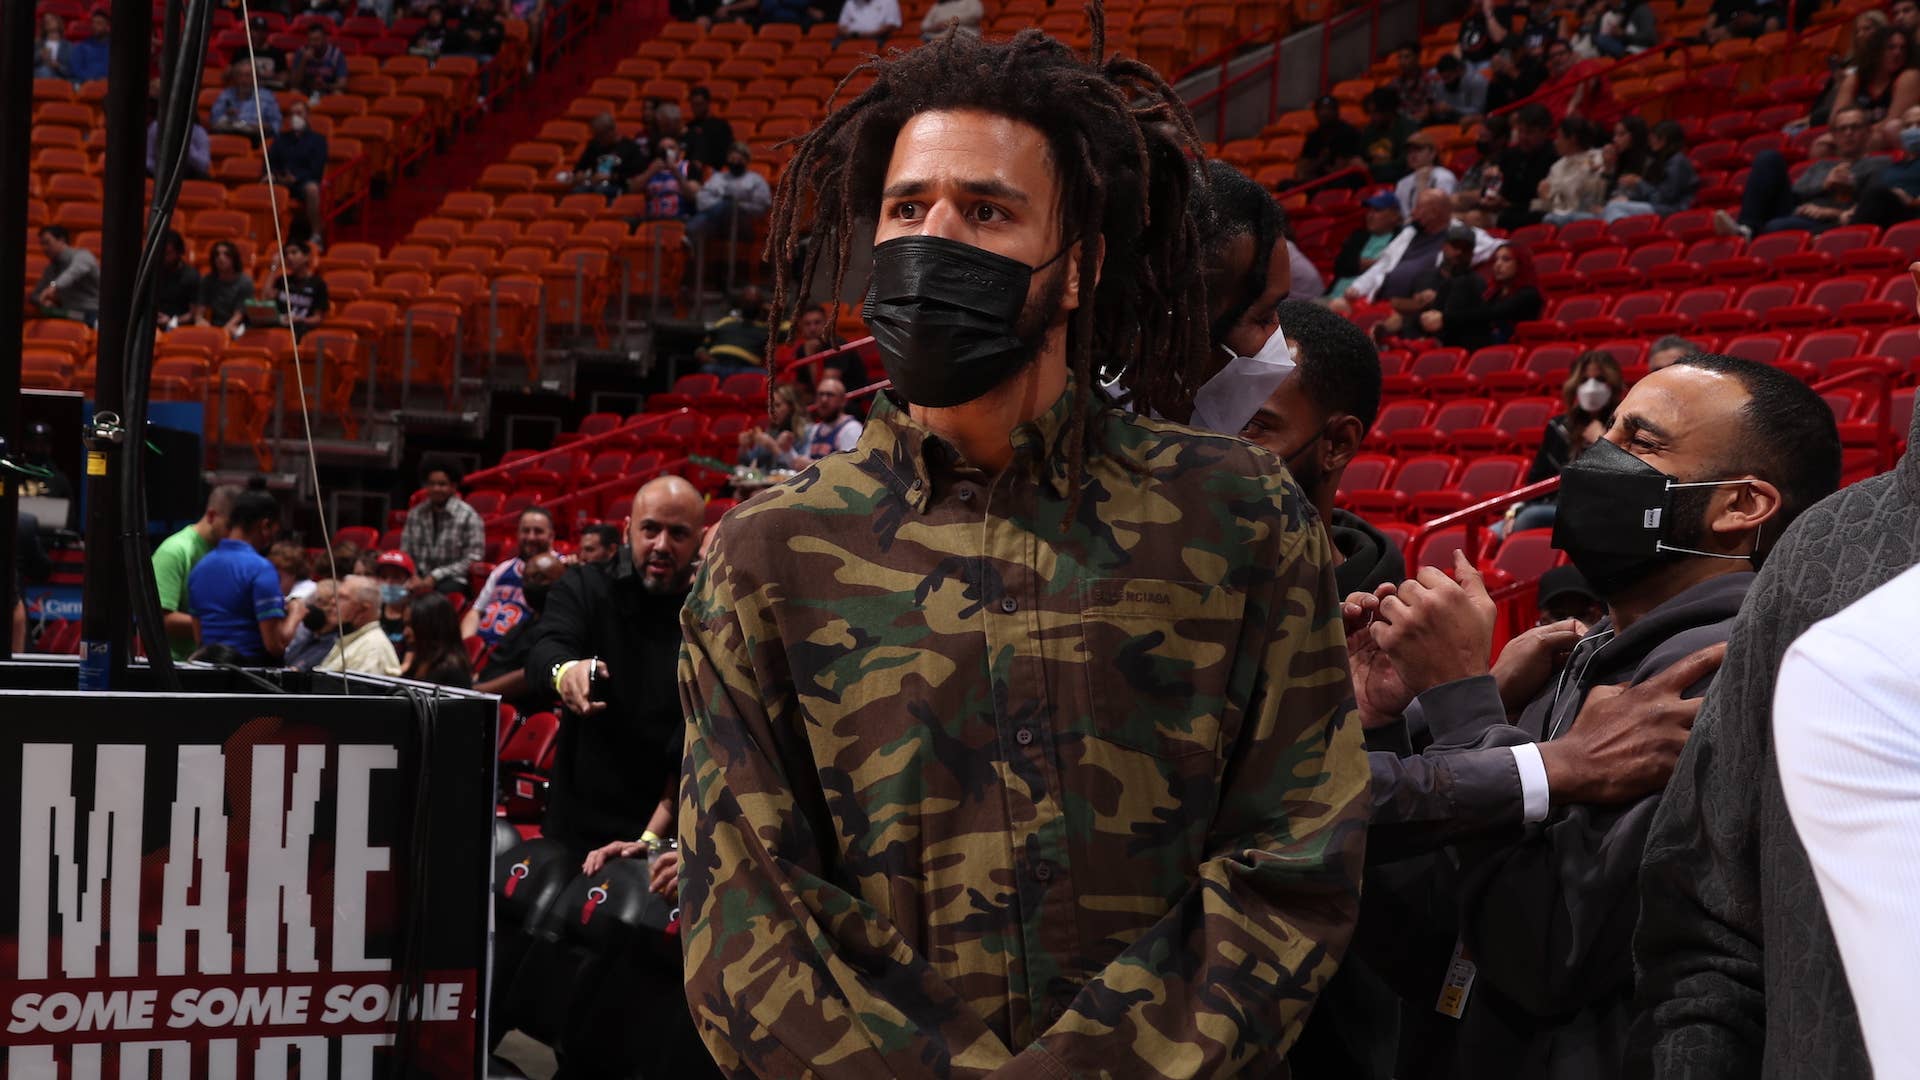 J. Cole joins Canadian basketball team